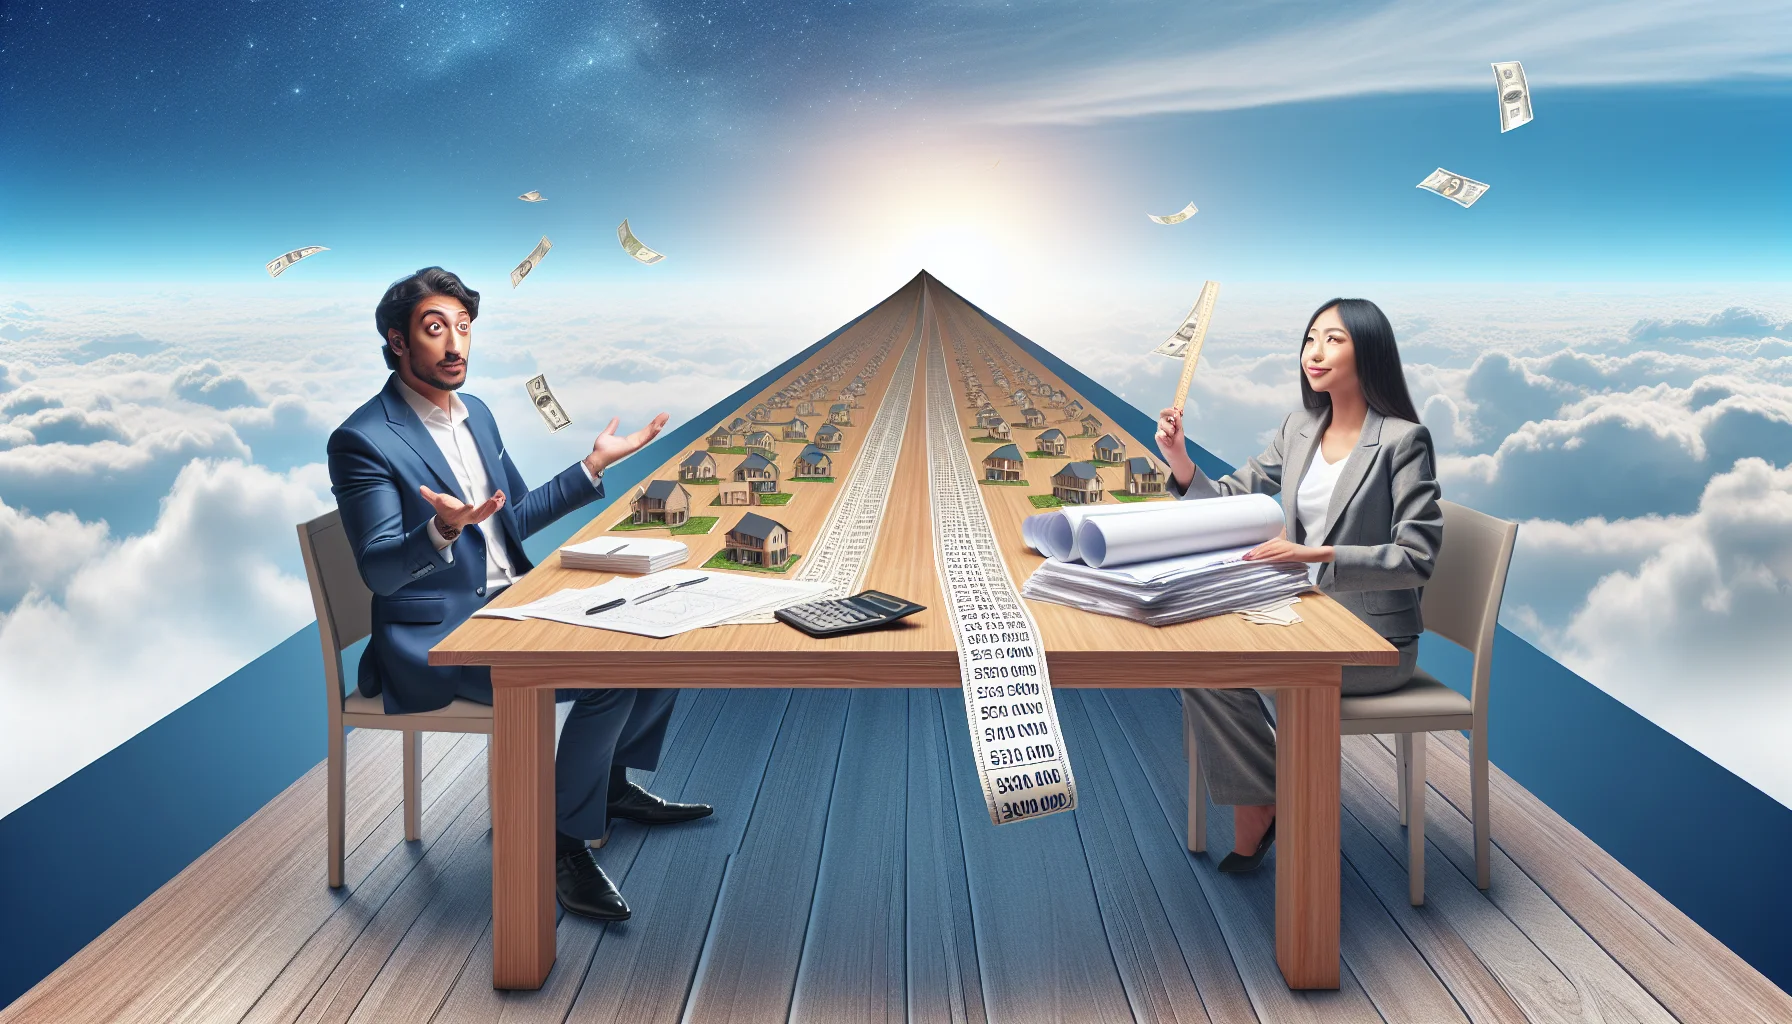 Picture an exaggerated humorous scene where a couple of people, a Middle-Eastern man who seems to understand complex financial equations and an Asian woman holding blueprints of a dream house, are sitting at a extremely long wooden table. The table stretches out into the horizon, seemingly infinite, representing the length of a home loan in an ideal real estate scenario. On the table, piles of paperwork, scales models of homes, and a calendar with pages flying off to symbolize years passing. The sky is bright, symbolising optimism.